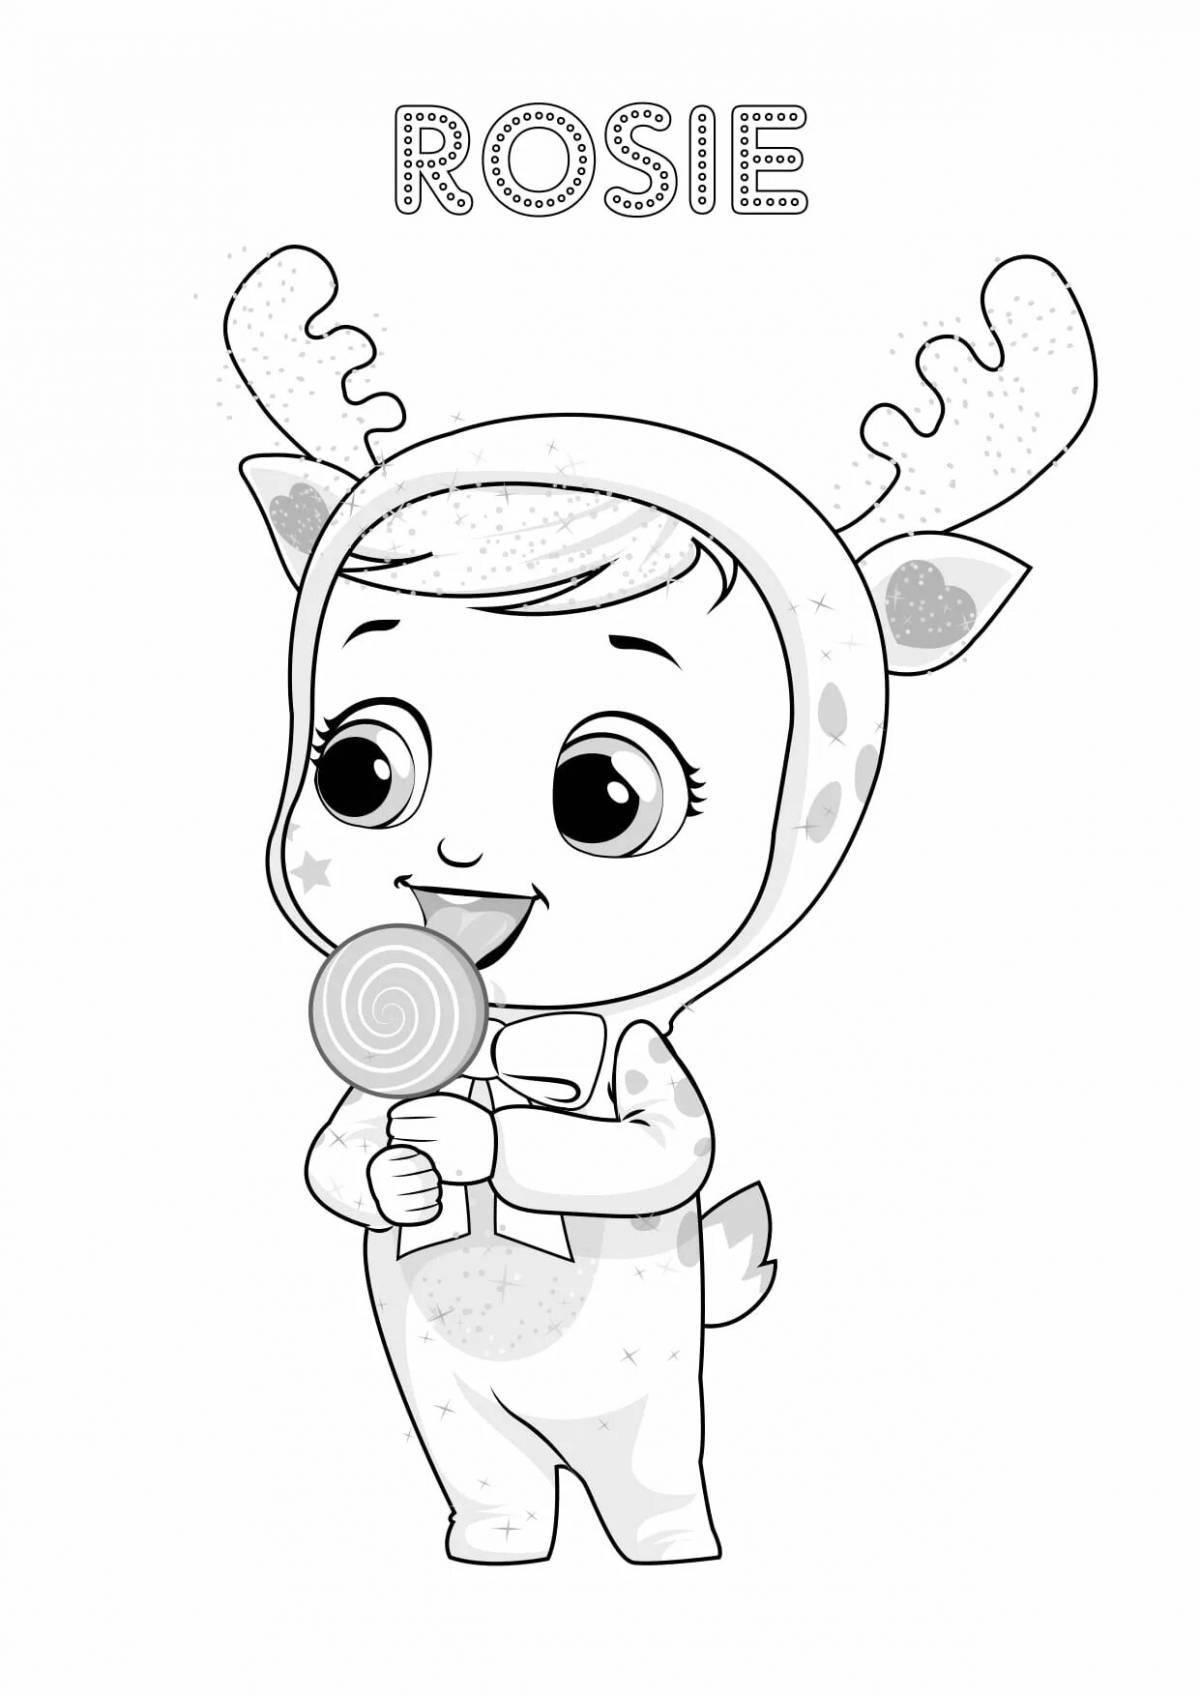 Charon baby sparkling coloring page